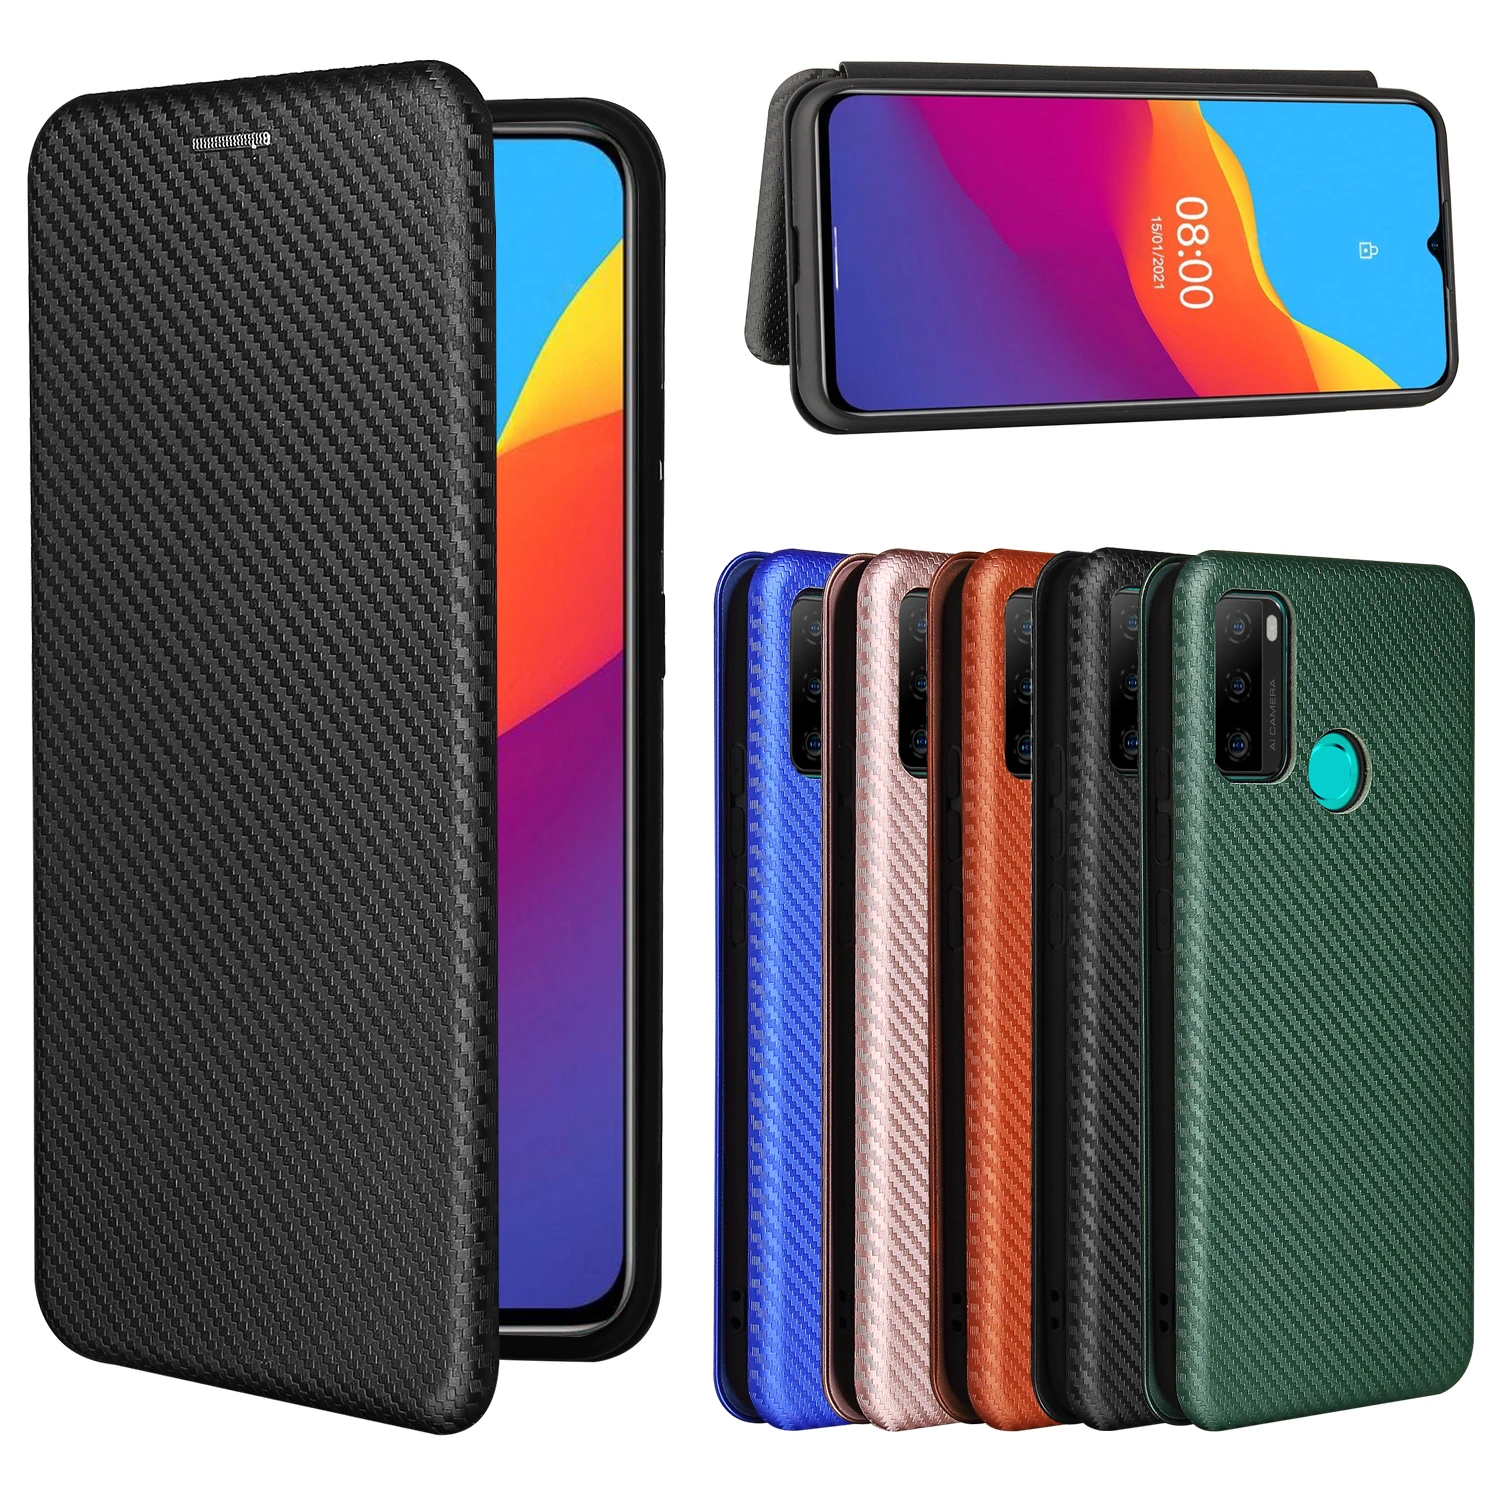 6.52 Inch Black Kickstand Flip Wallet Protective Cover with One Tempered Glass Screen Protector for Ulefone Note 10 Case for Ulefone Note 10